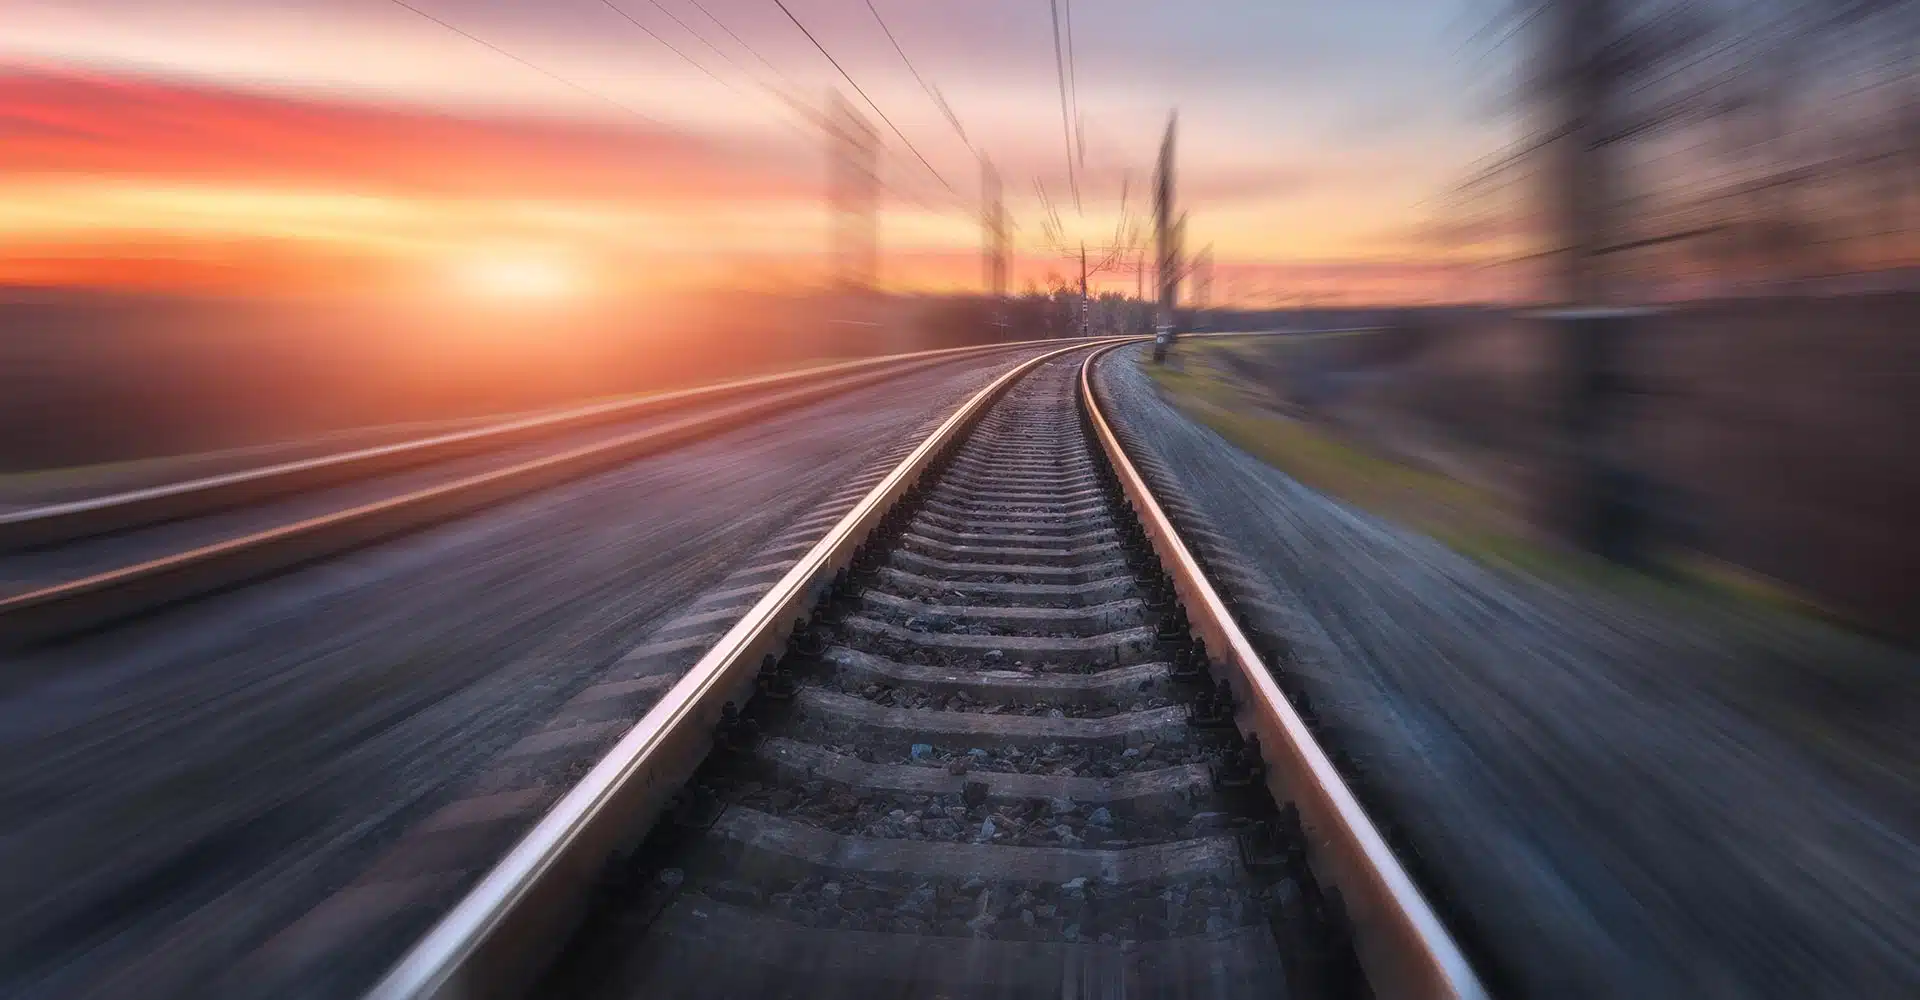 Railroad in motion at sunset